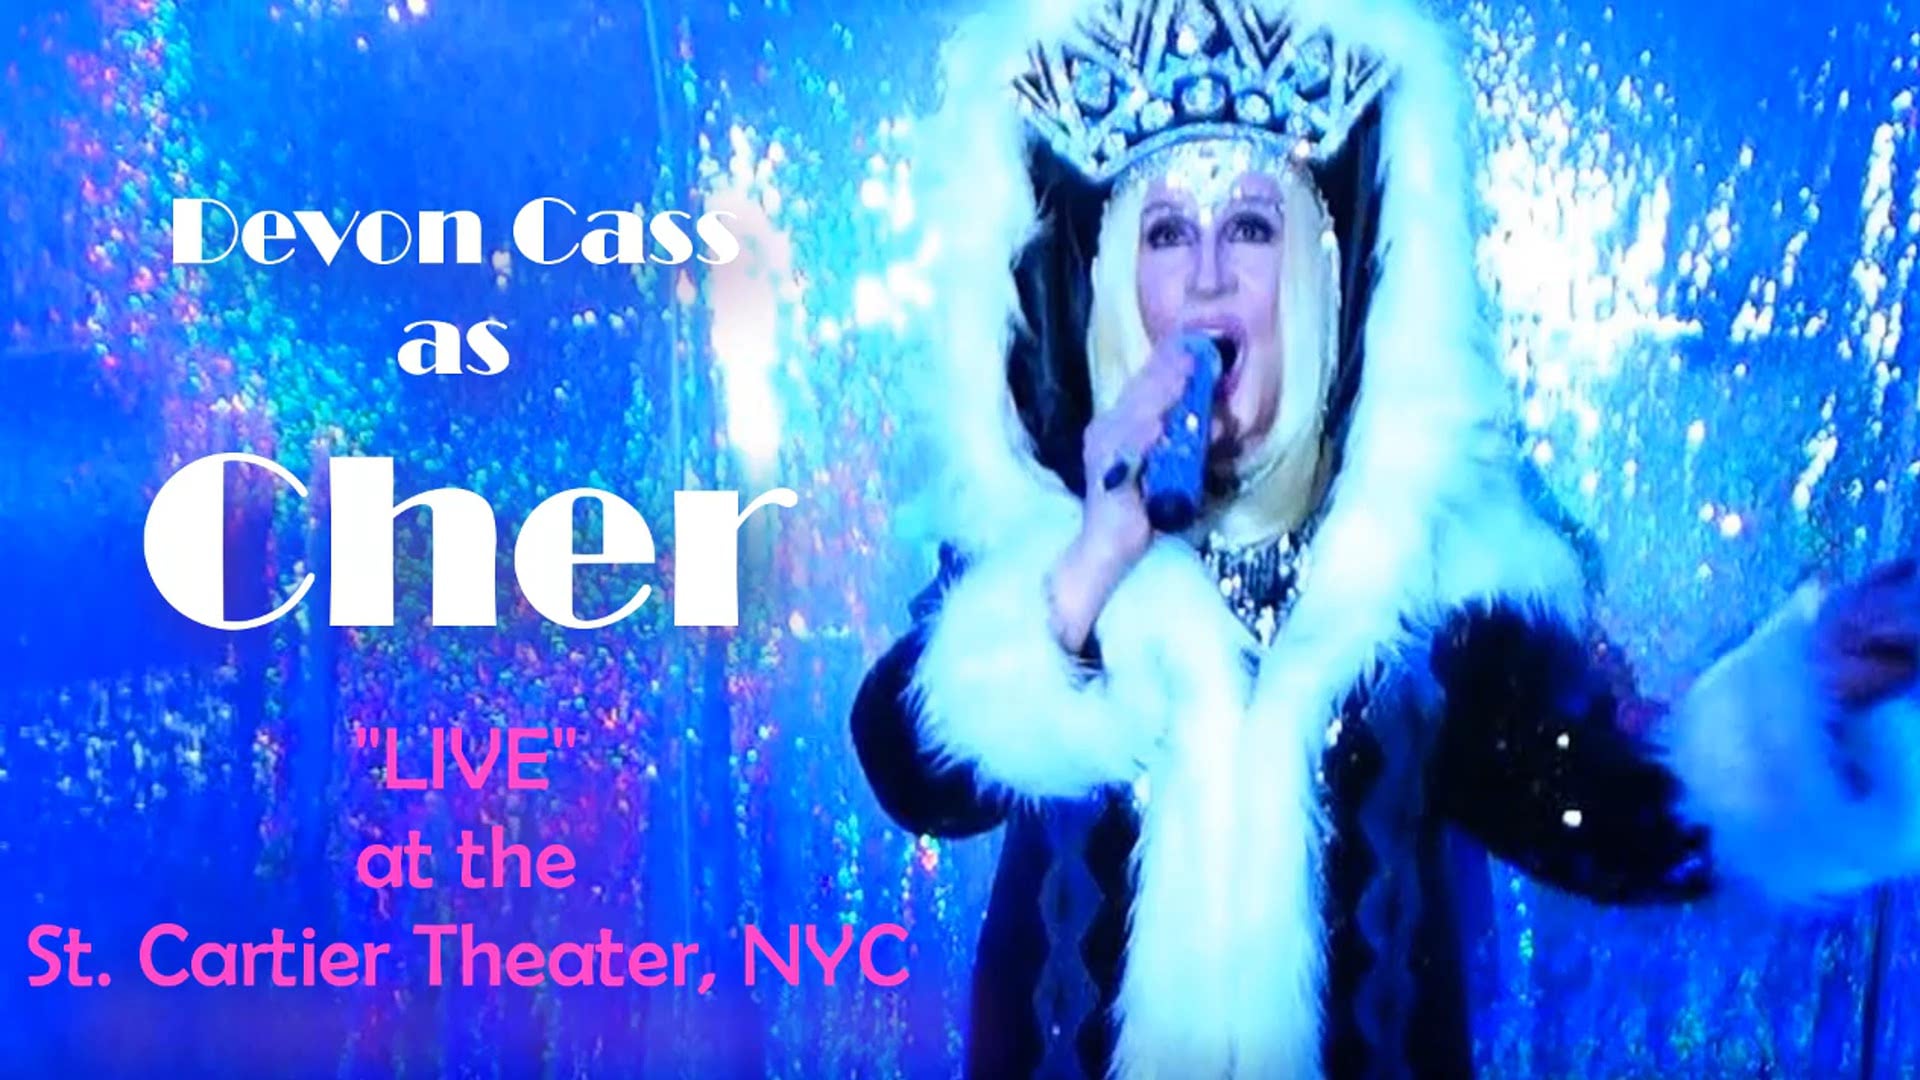 Promotional video thumbnail 1 for Devon Cass "Live Singing" Cher and more...